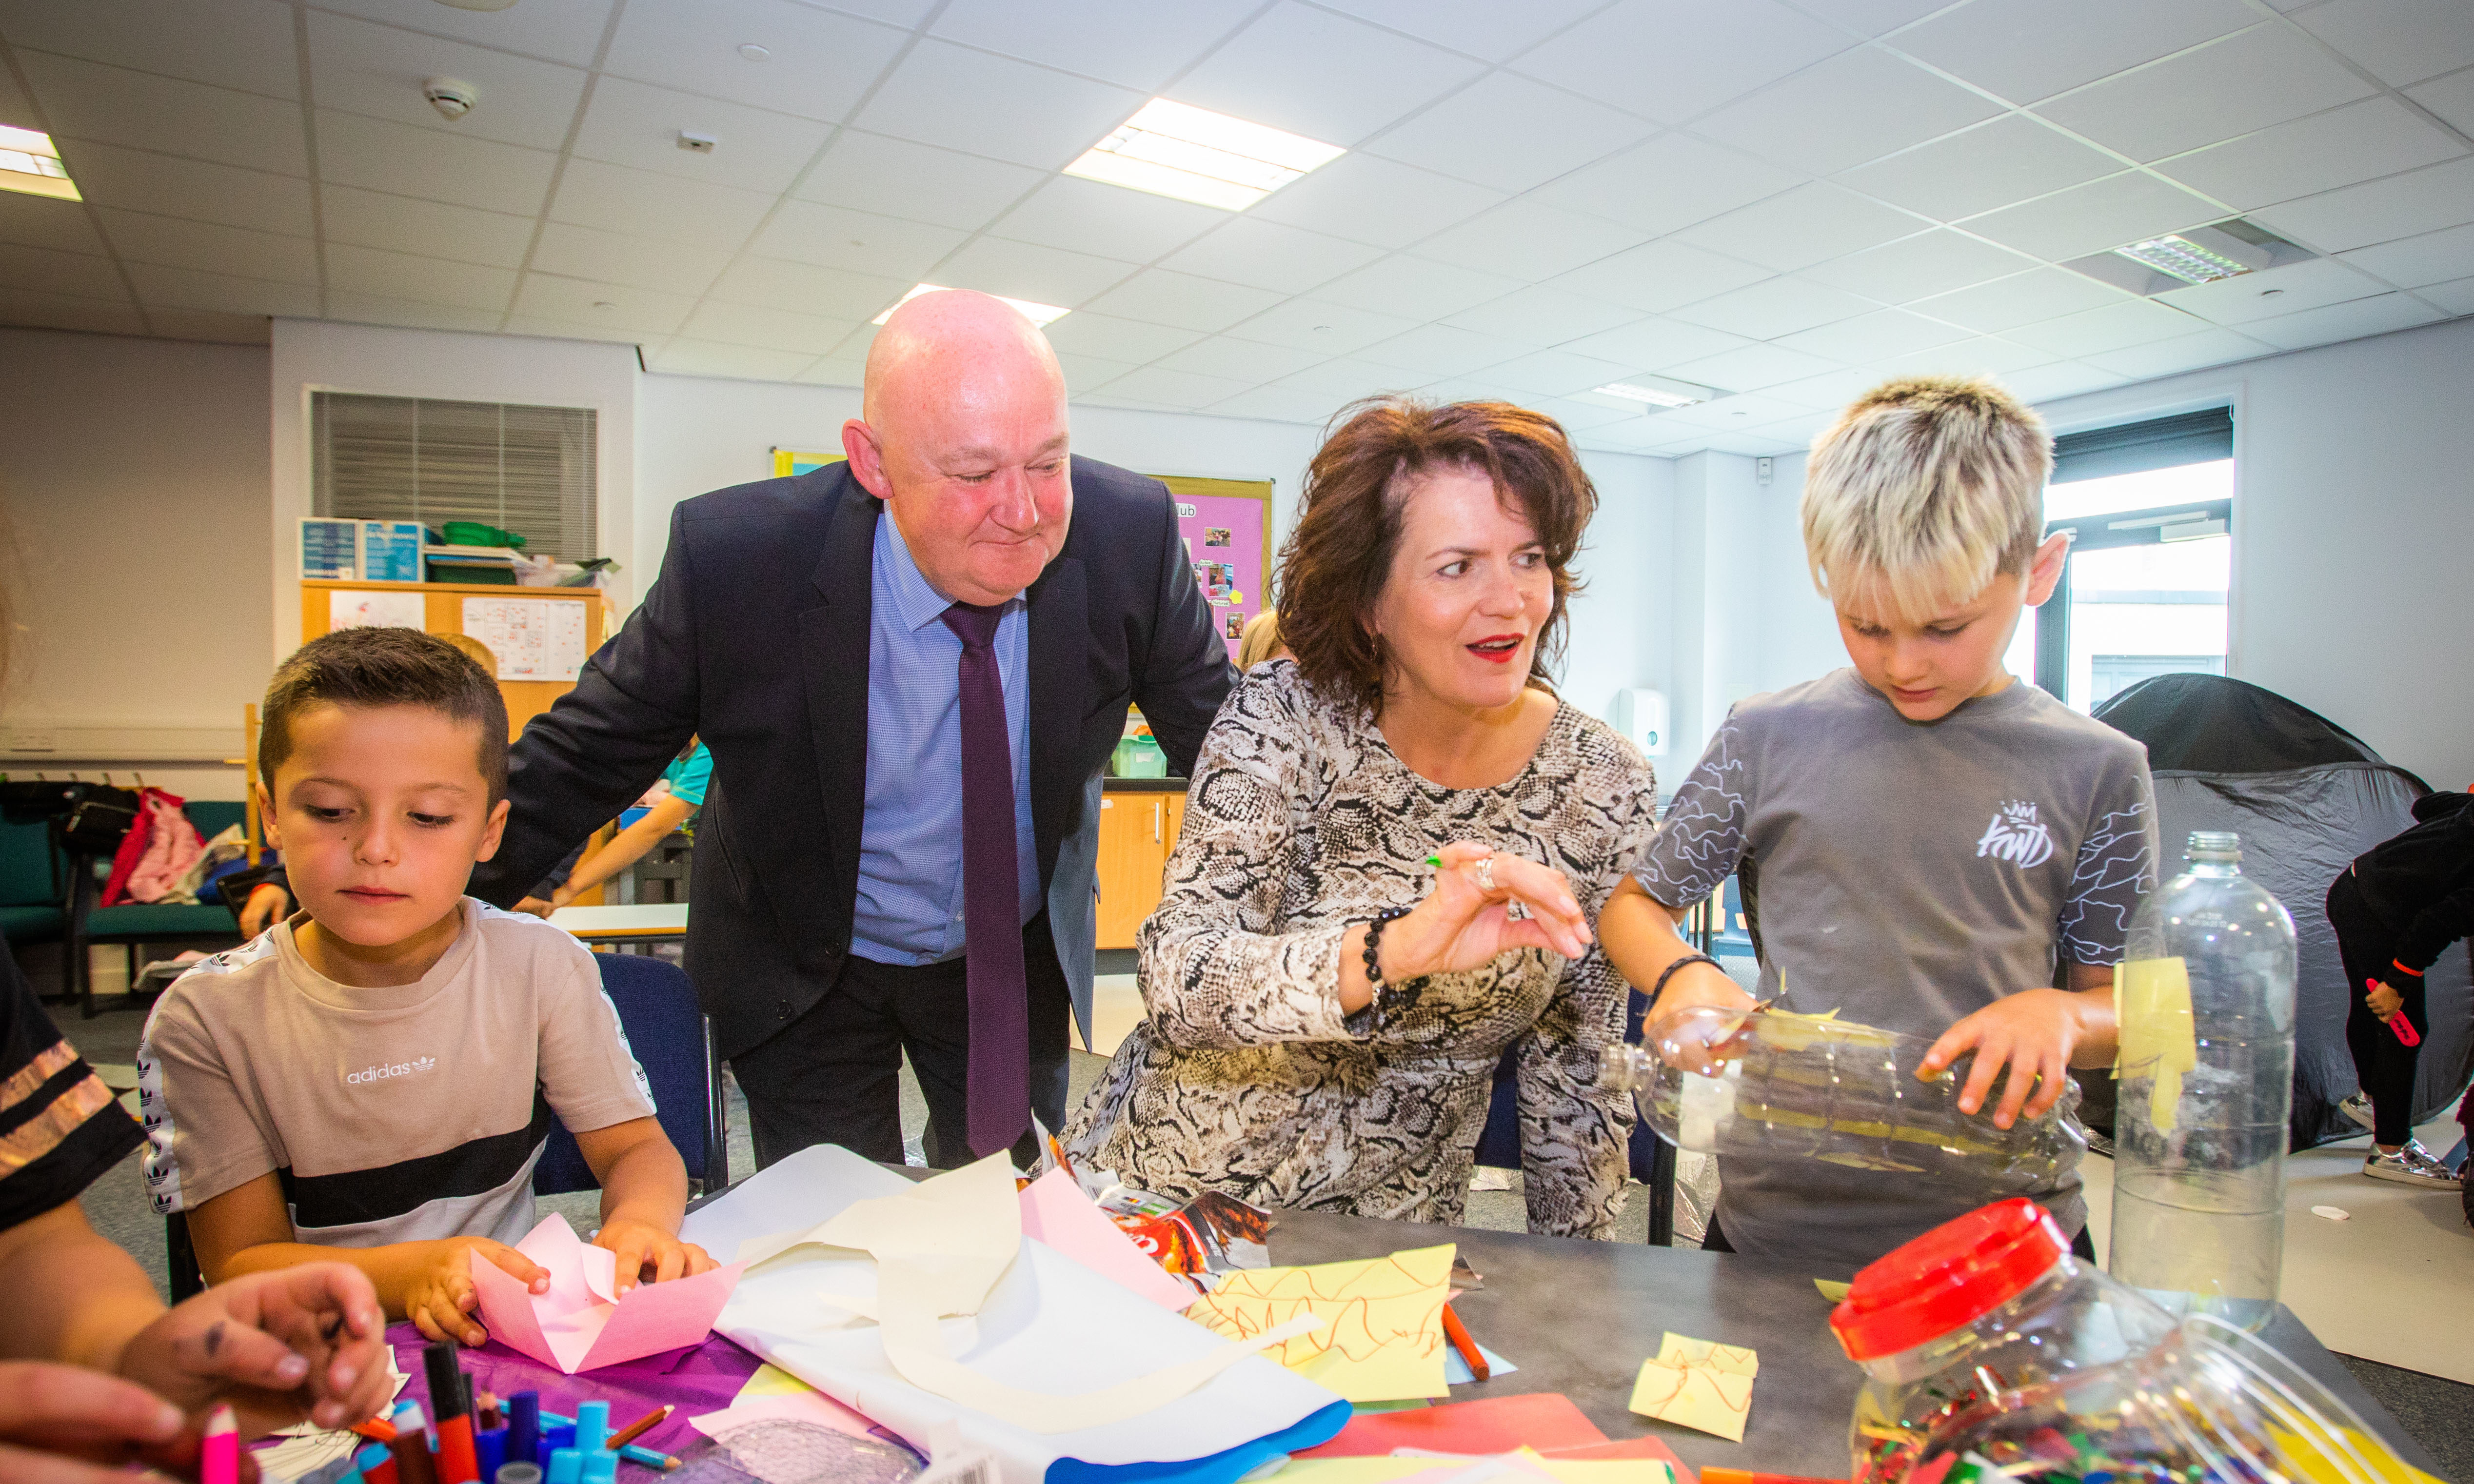 Headteacher of St John's RC Academy Seán Hagney and Perth and Kinross Council's Executive Director for Education and Children's Services Sheena Devlin meet youngsters taking part in the Taste of St John's programme.